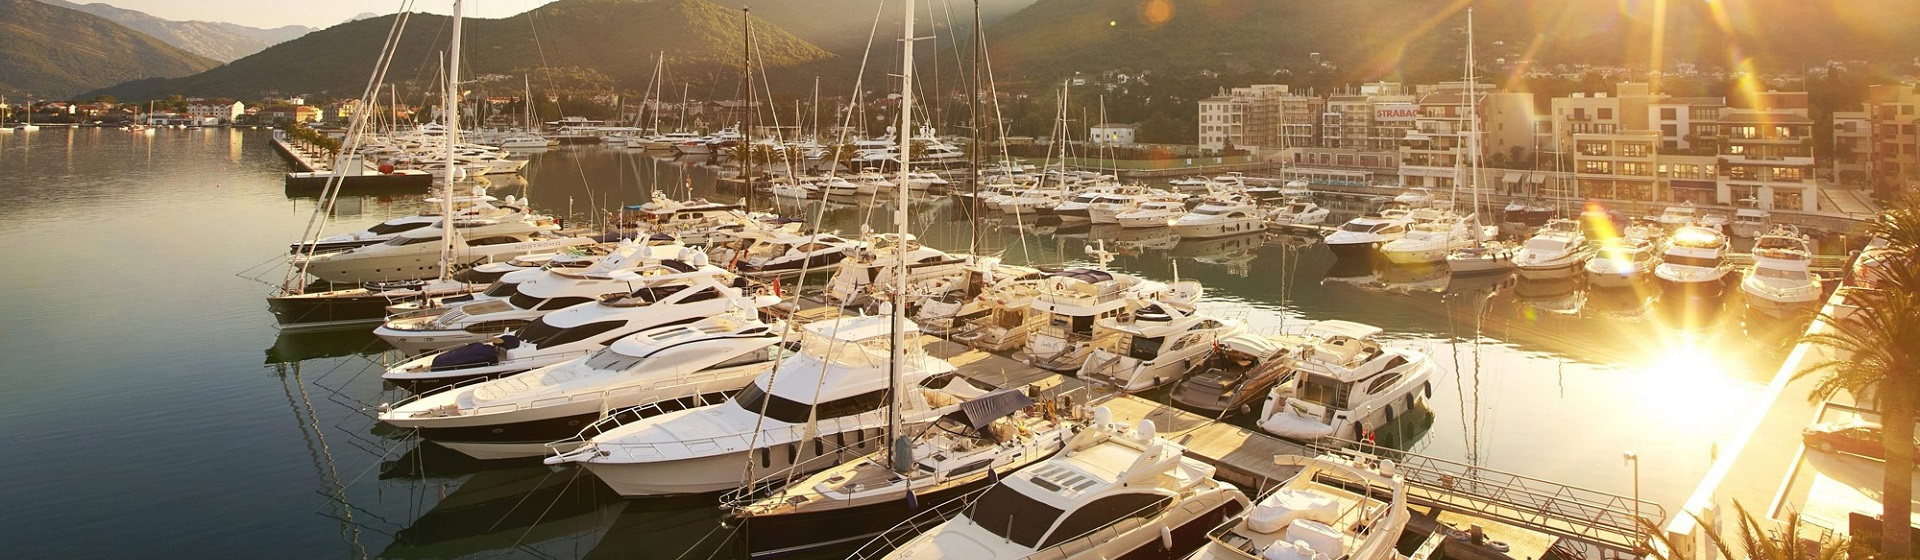 Rent a motor barboat with Navigare Worldwide.